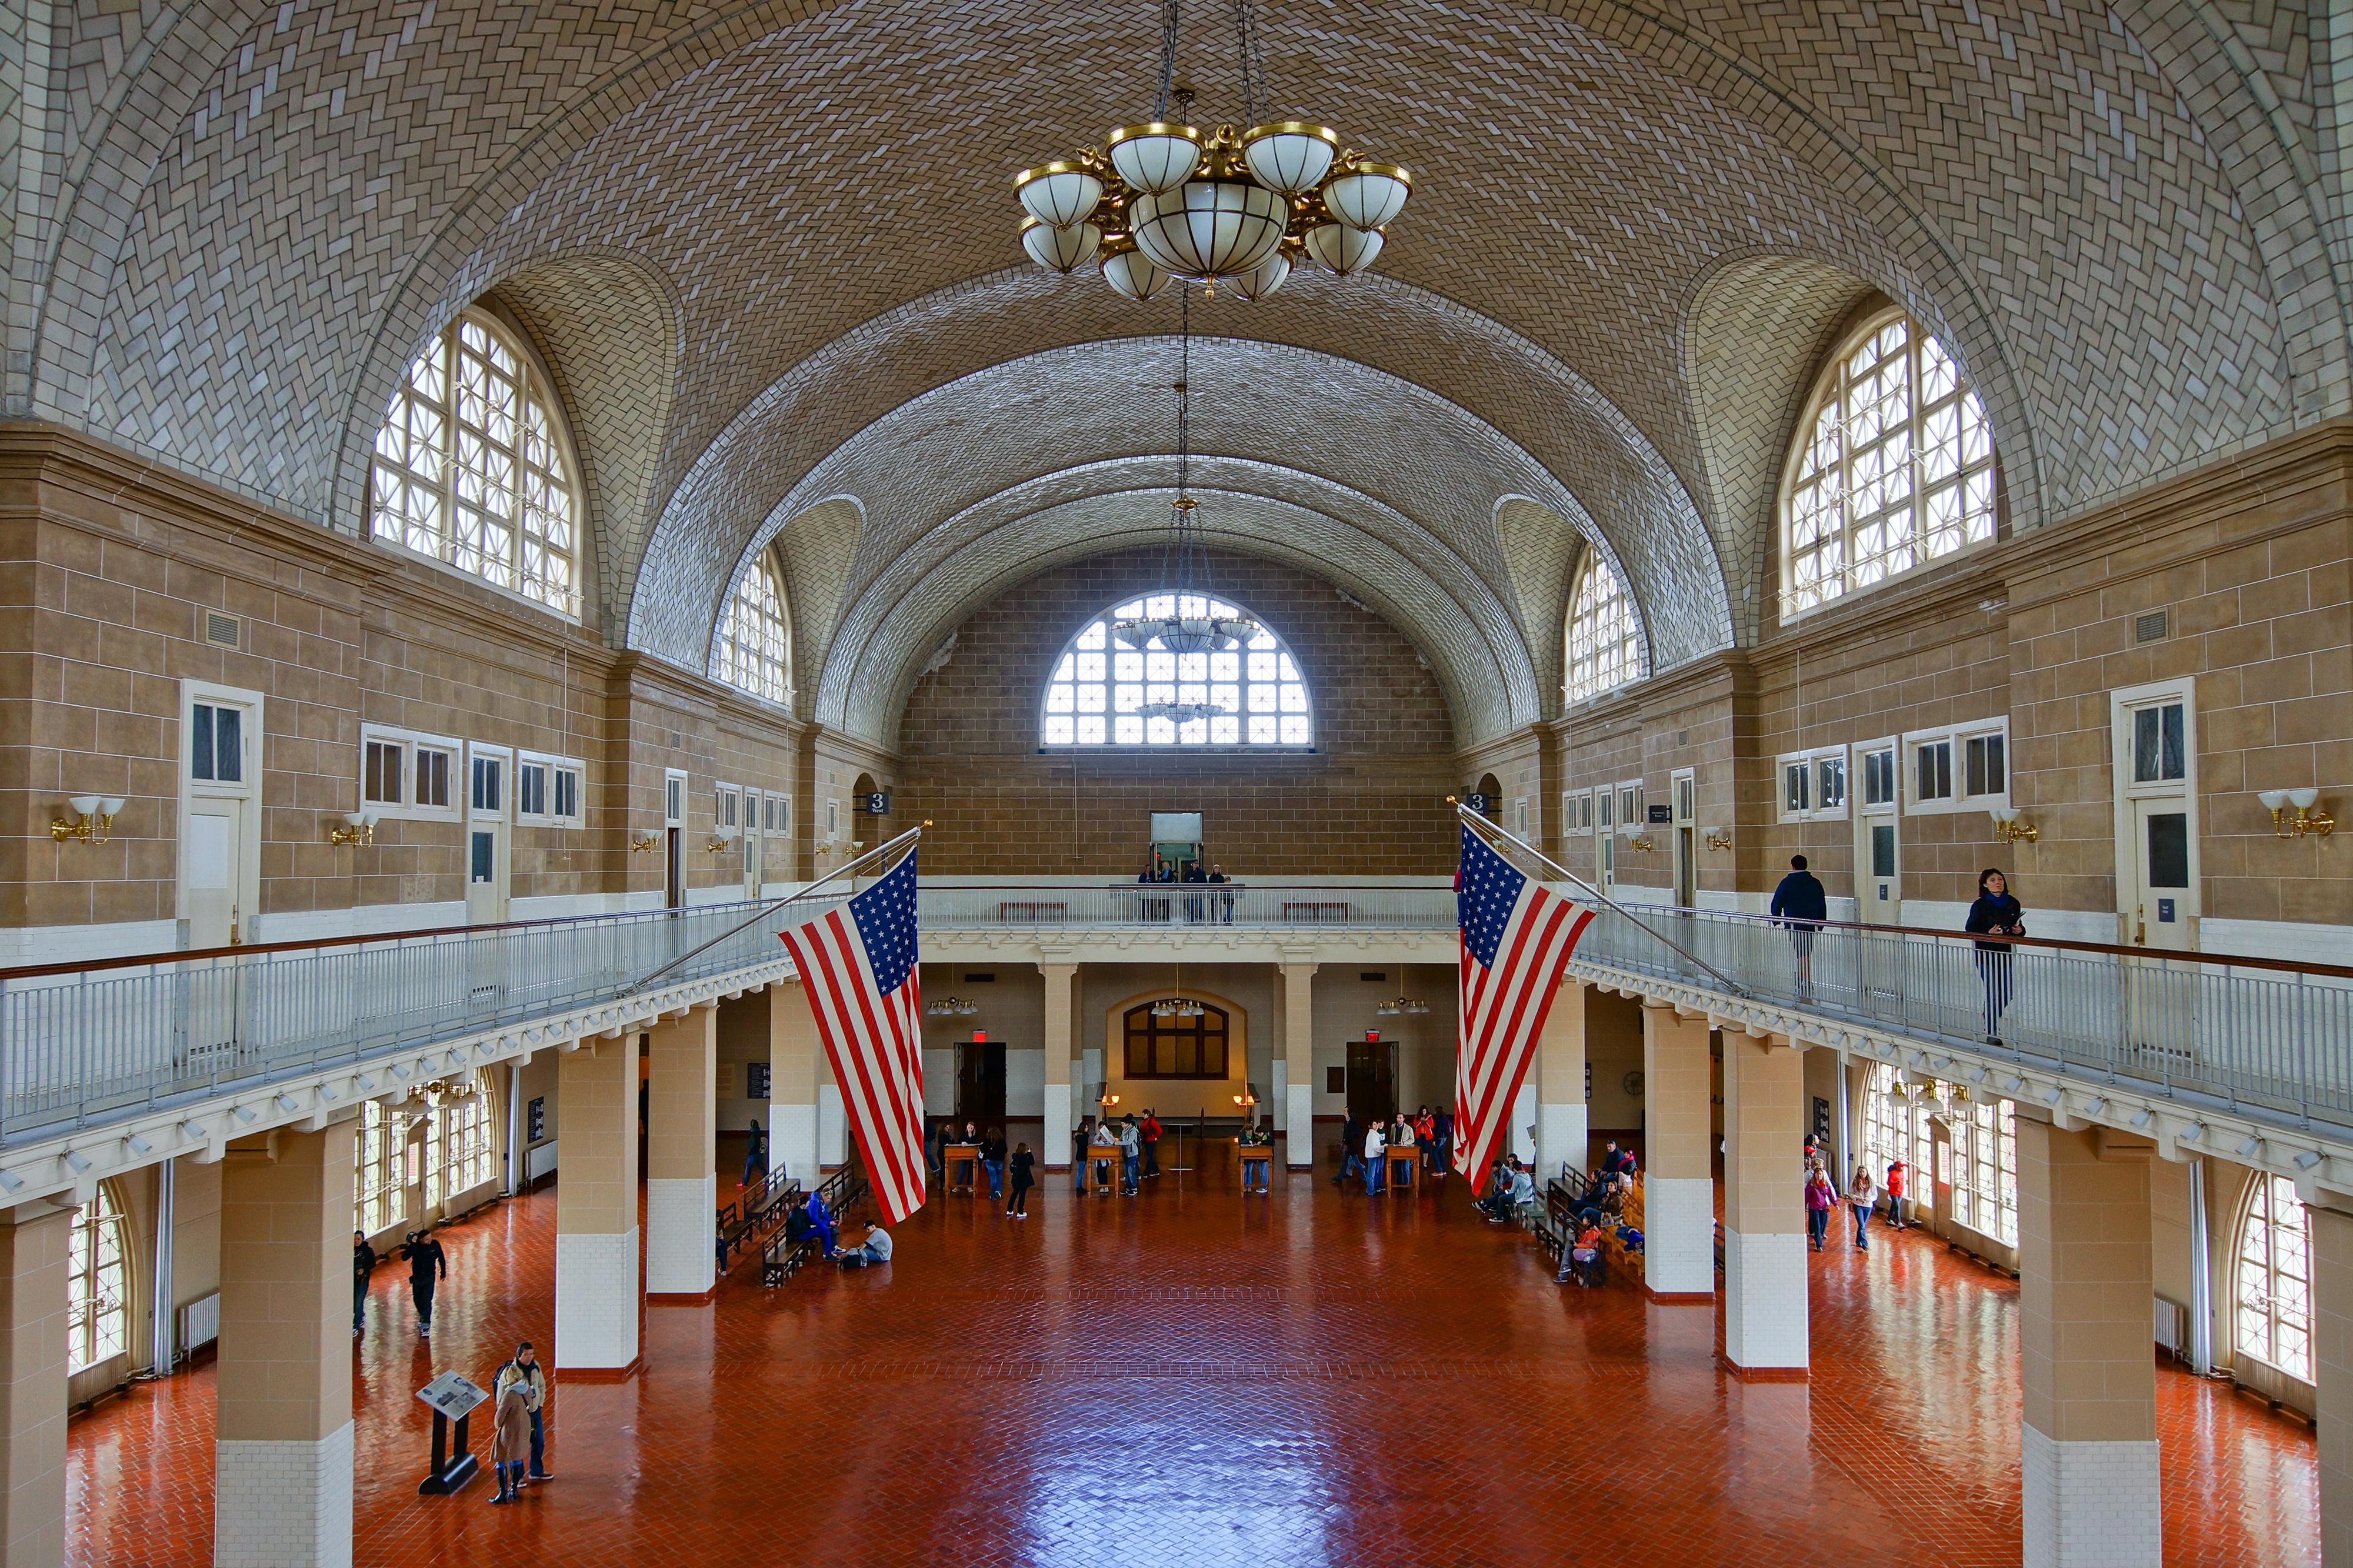 Great Hall has terra cotta-colored tile floor, a balcony, large arched windows, and vaulted ceiling